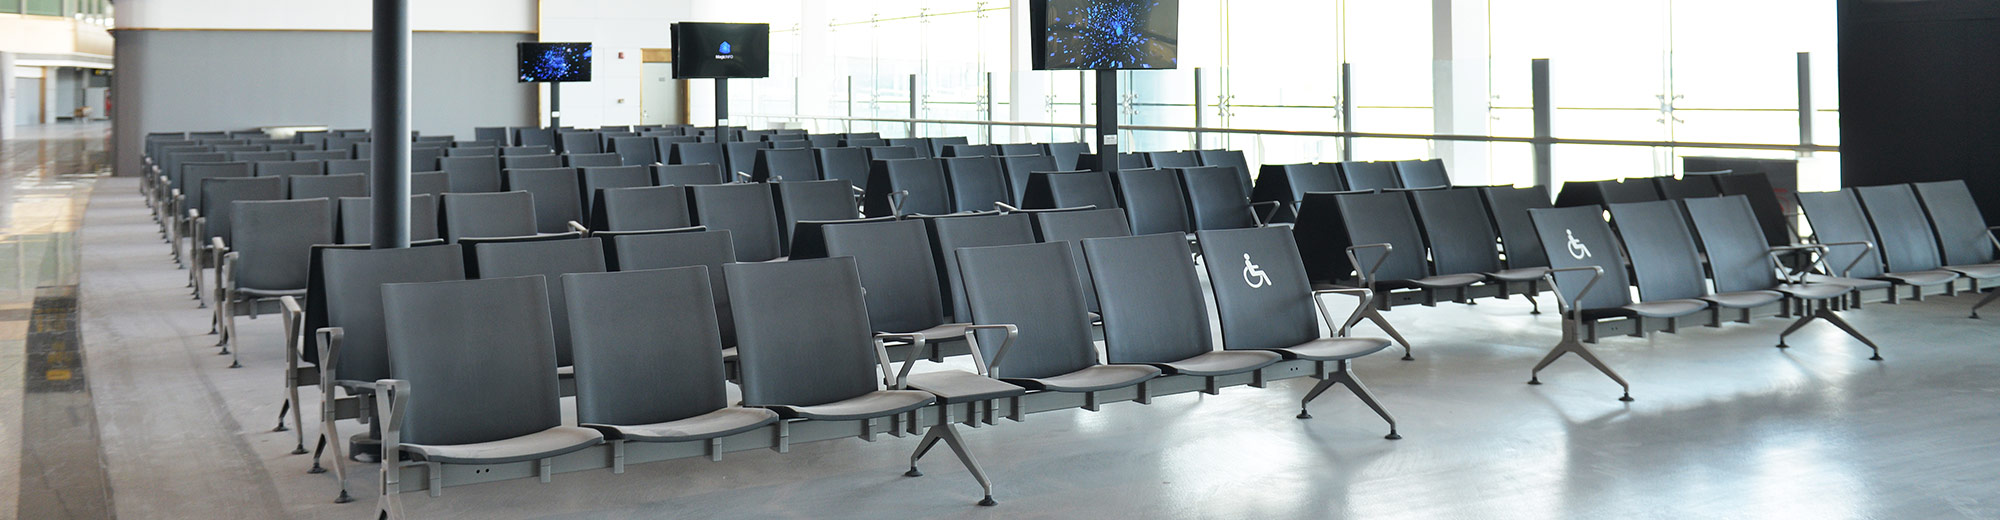 airport seating,waiting chairs